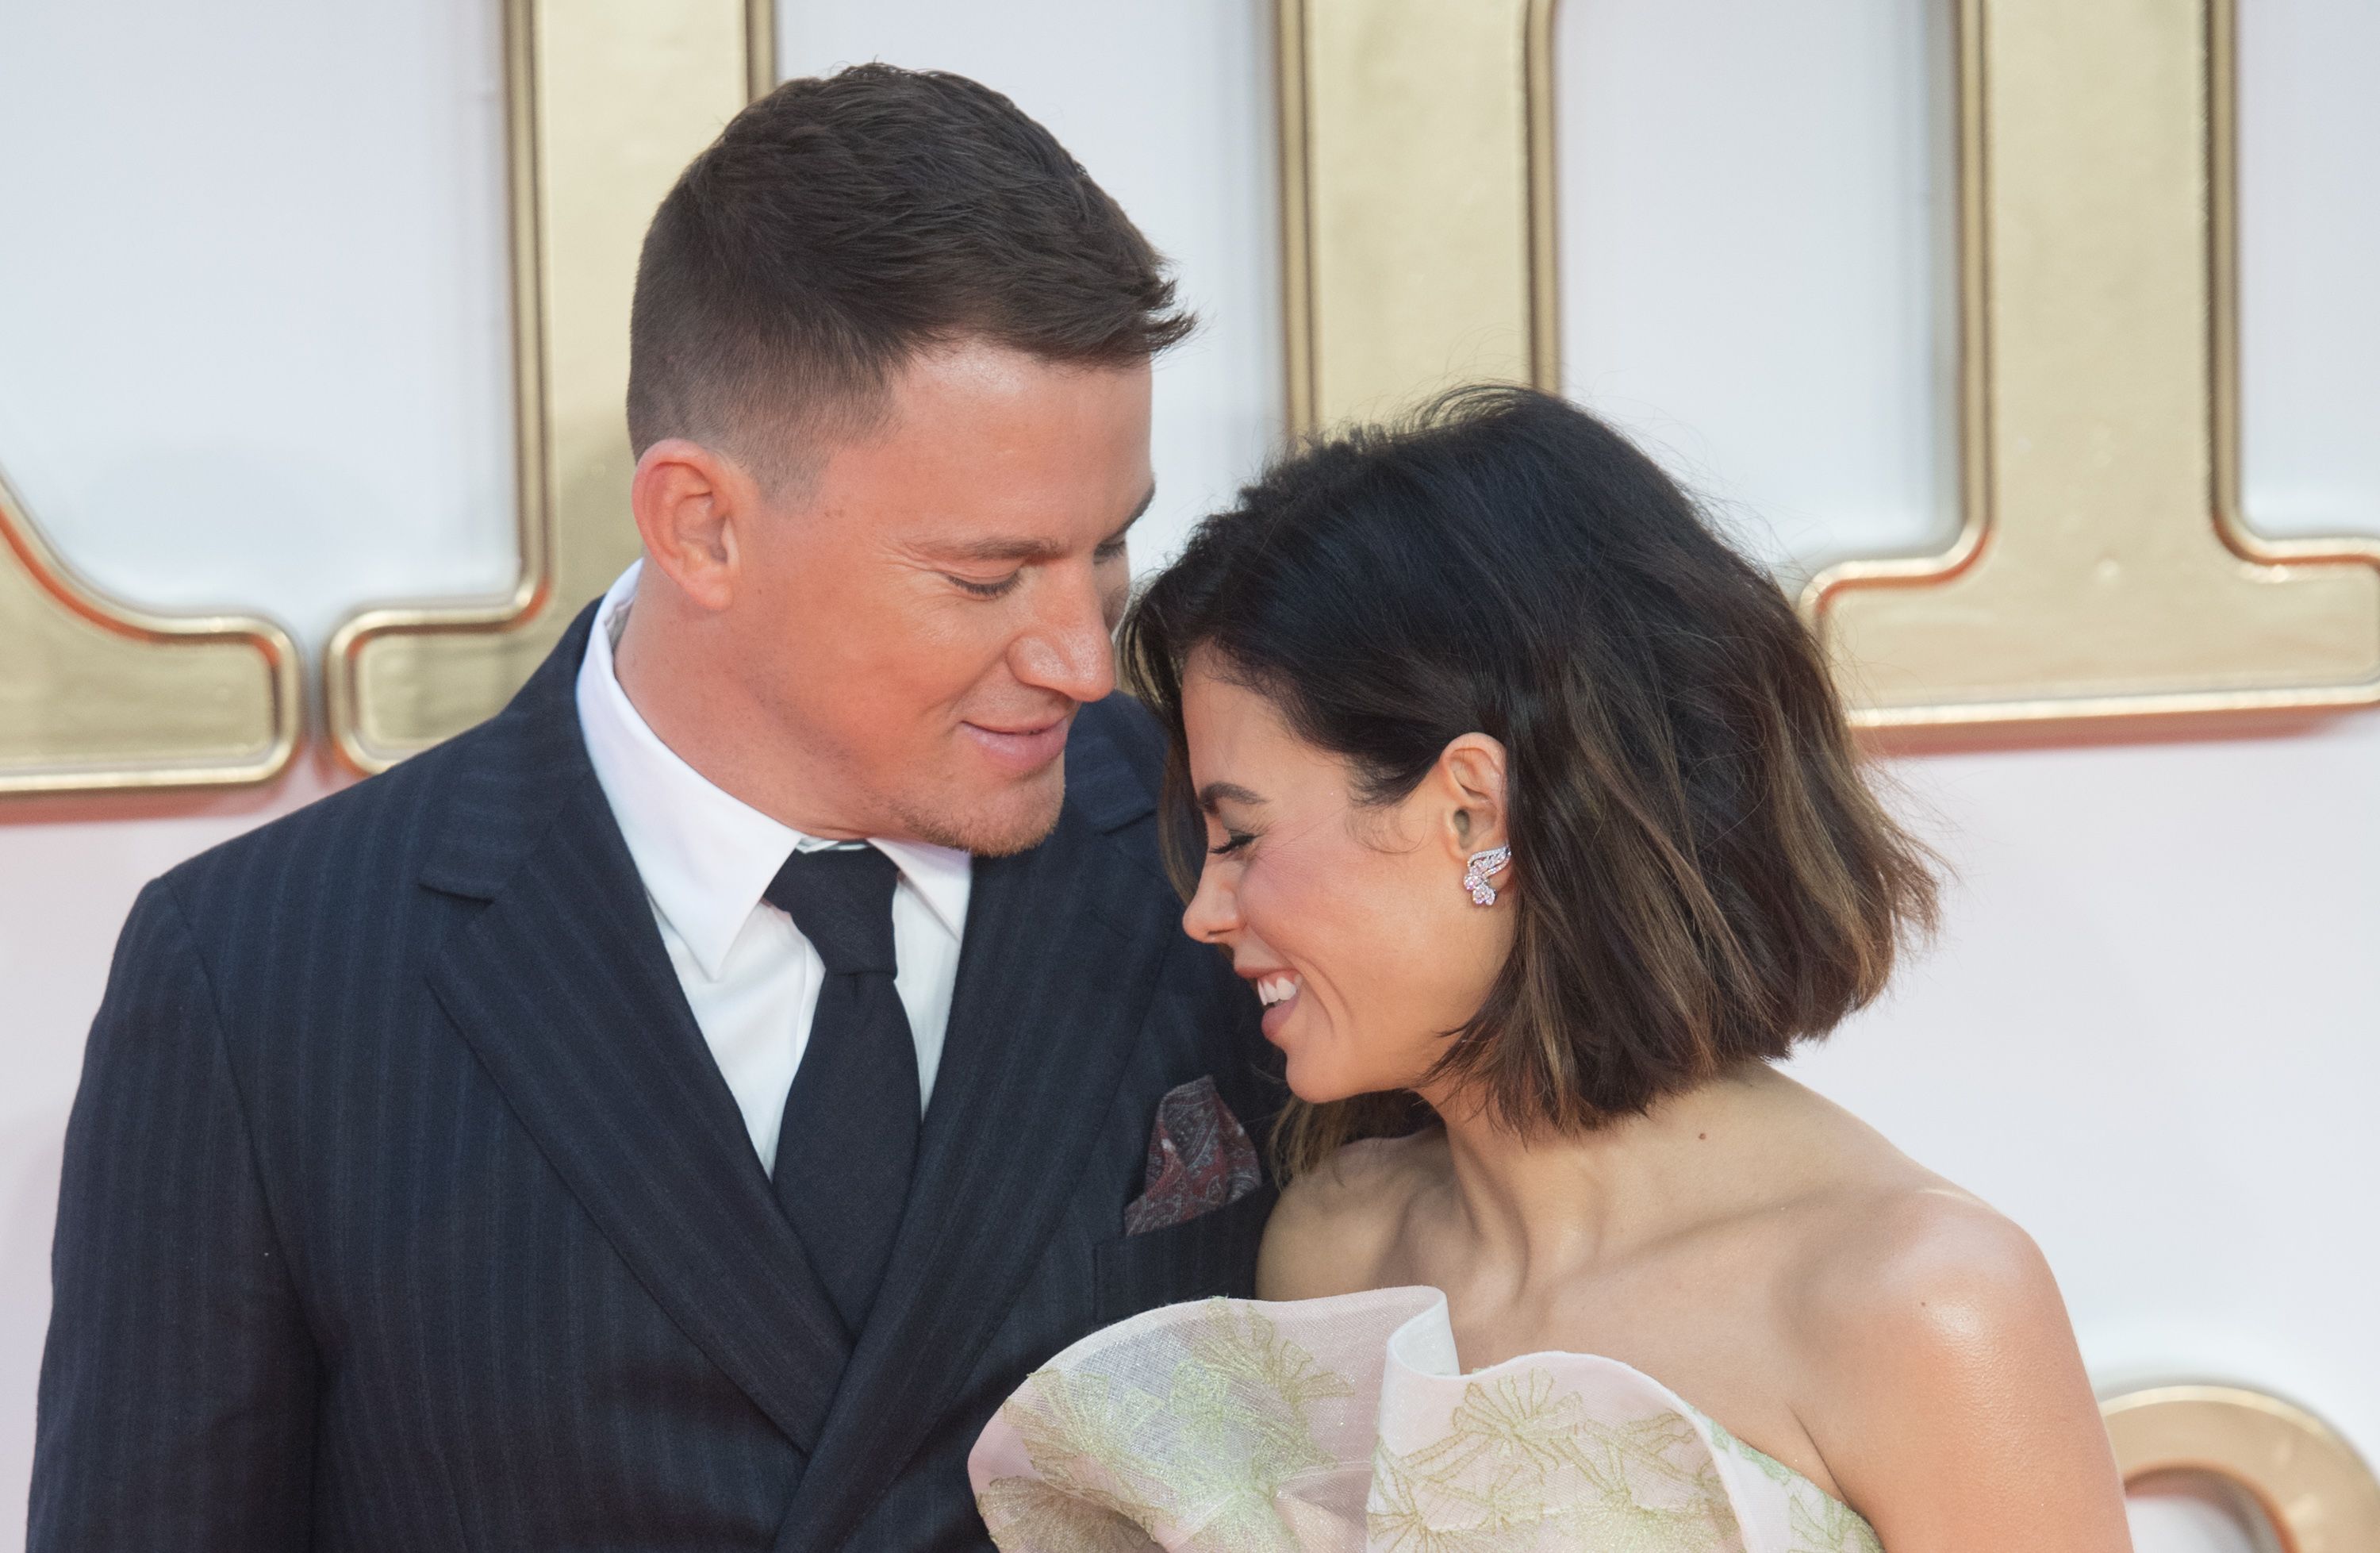 Channing Tatum Opens Up About Why He and Jenna Dewan Really Broke Up ...